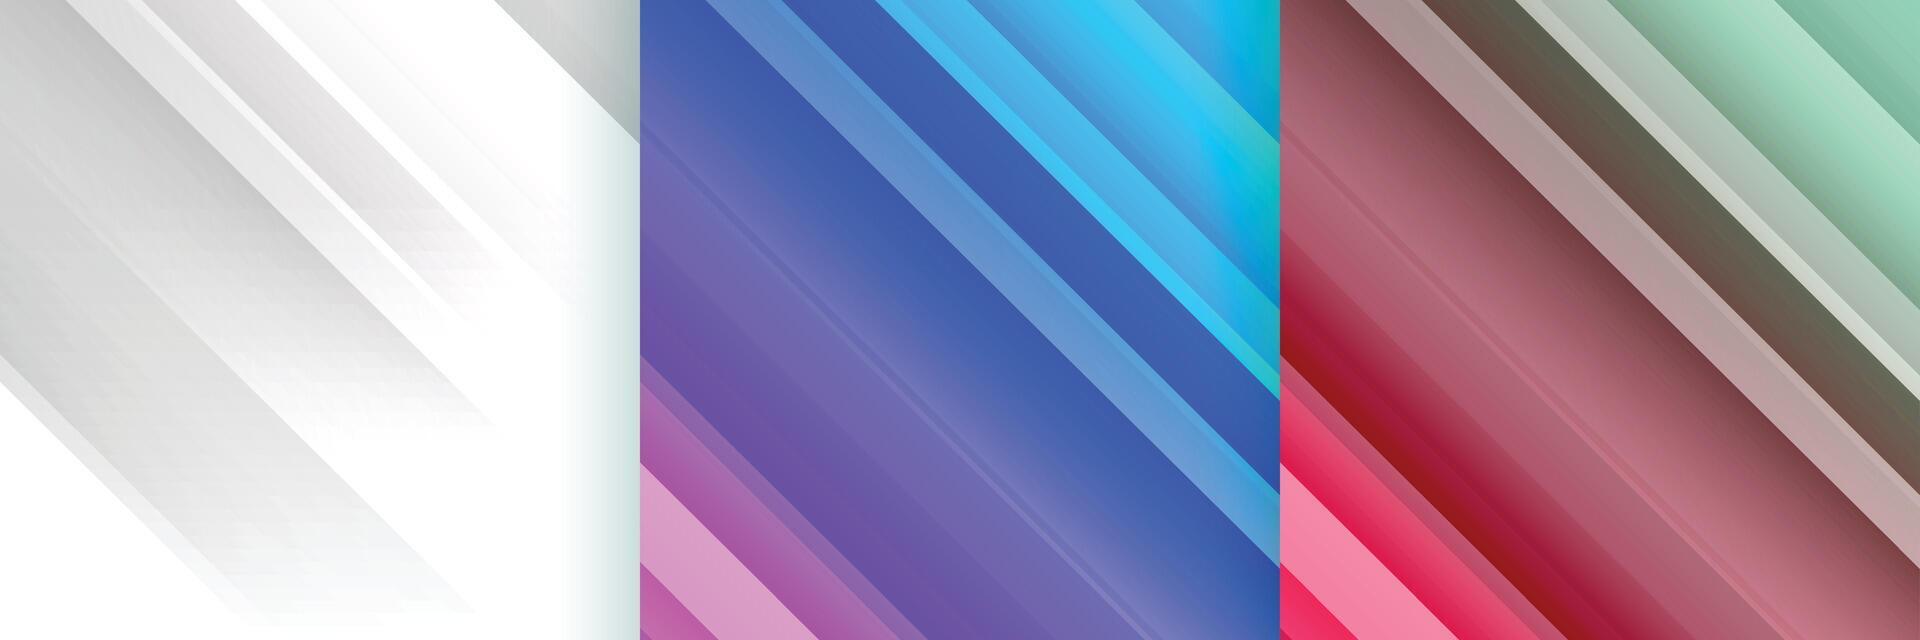 shiny abstract backgrounds set with diagonal lines vector